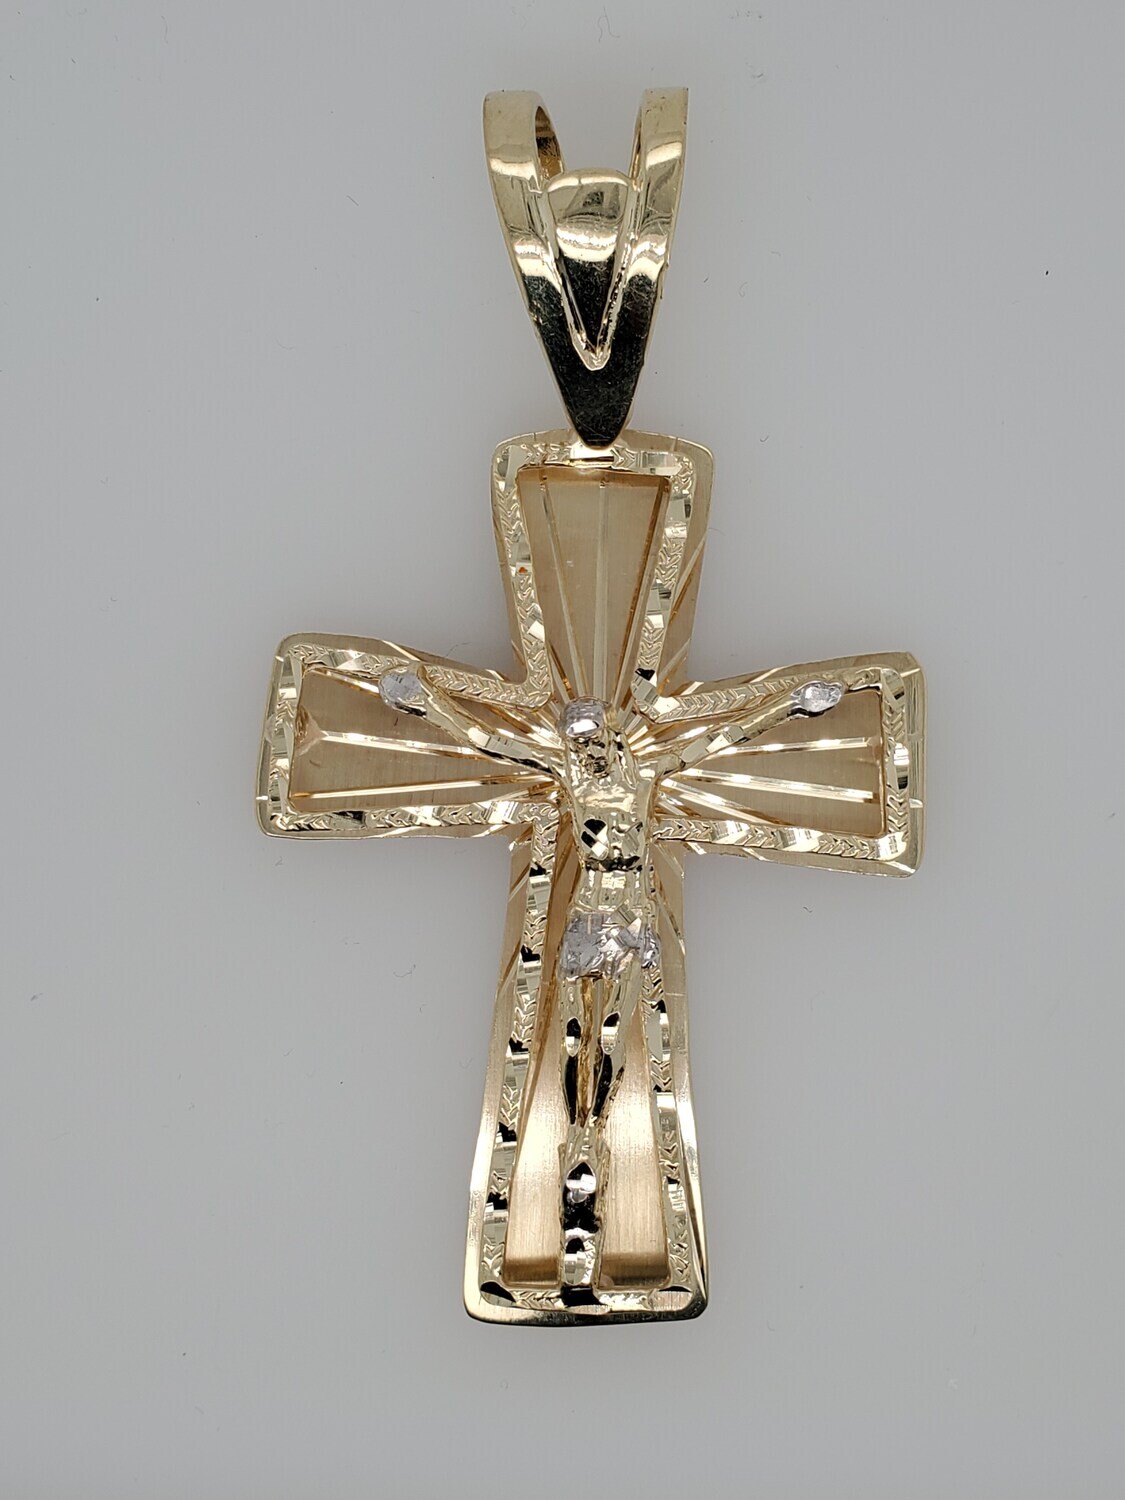 BRAND NEW!! 10k LARGE CRUCIFIX TWO TONE WITH DIAMOND CUT  INVENTORY # I-18290 75TH AVE